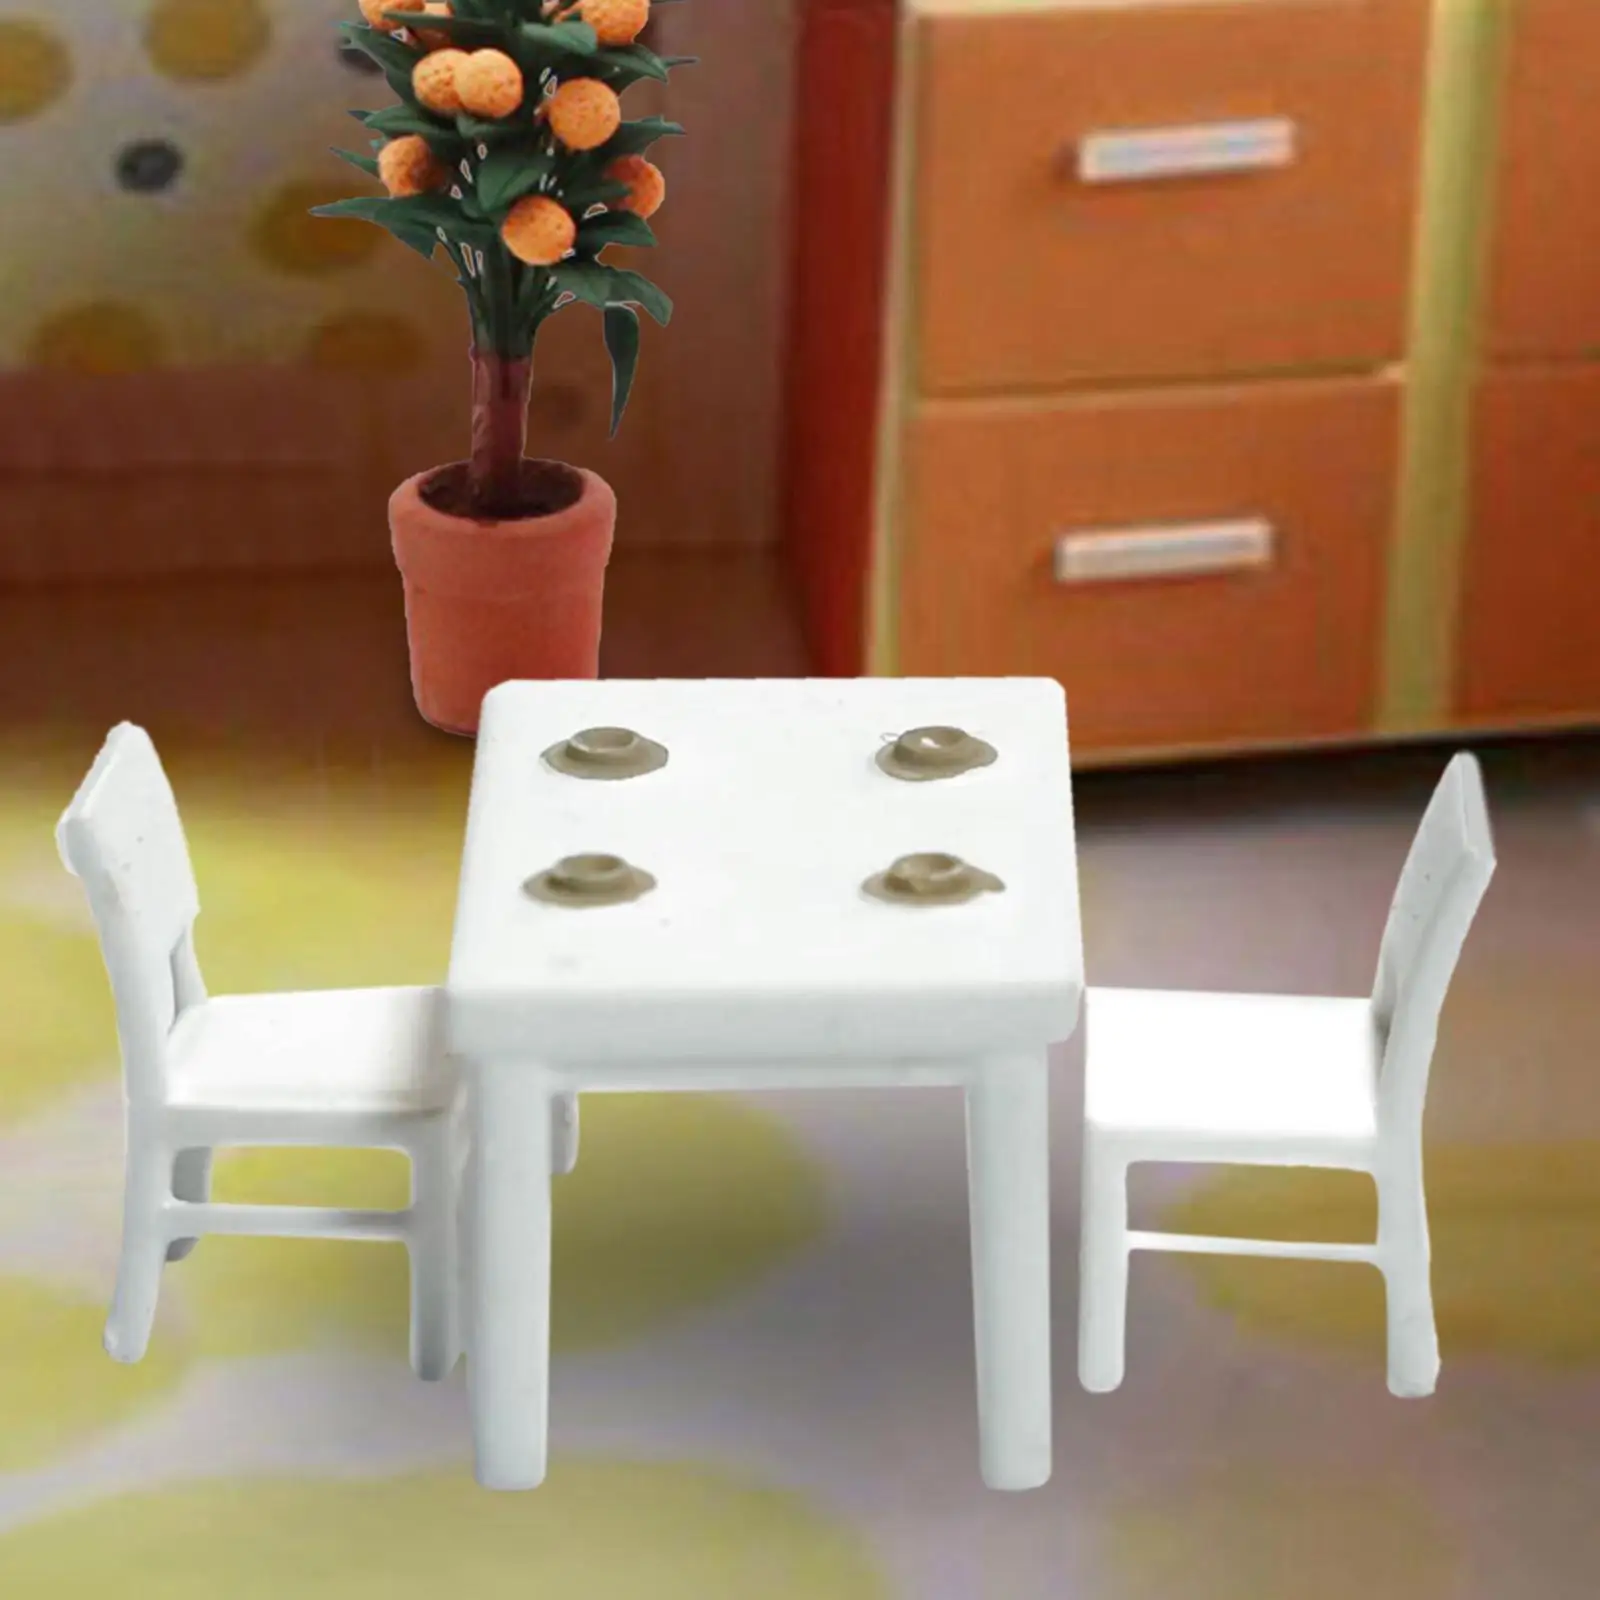 3Pcs 1:87 HO Scale Table and Chair Model Fairy Garden Layout Decoration Resin Crafts Micro Landscape with Food Tray Dioramas